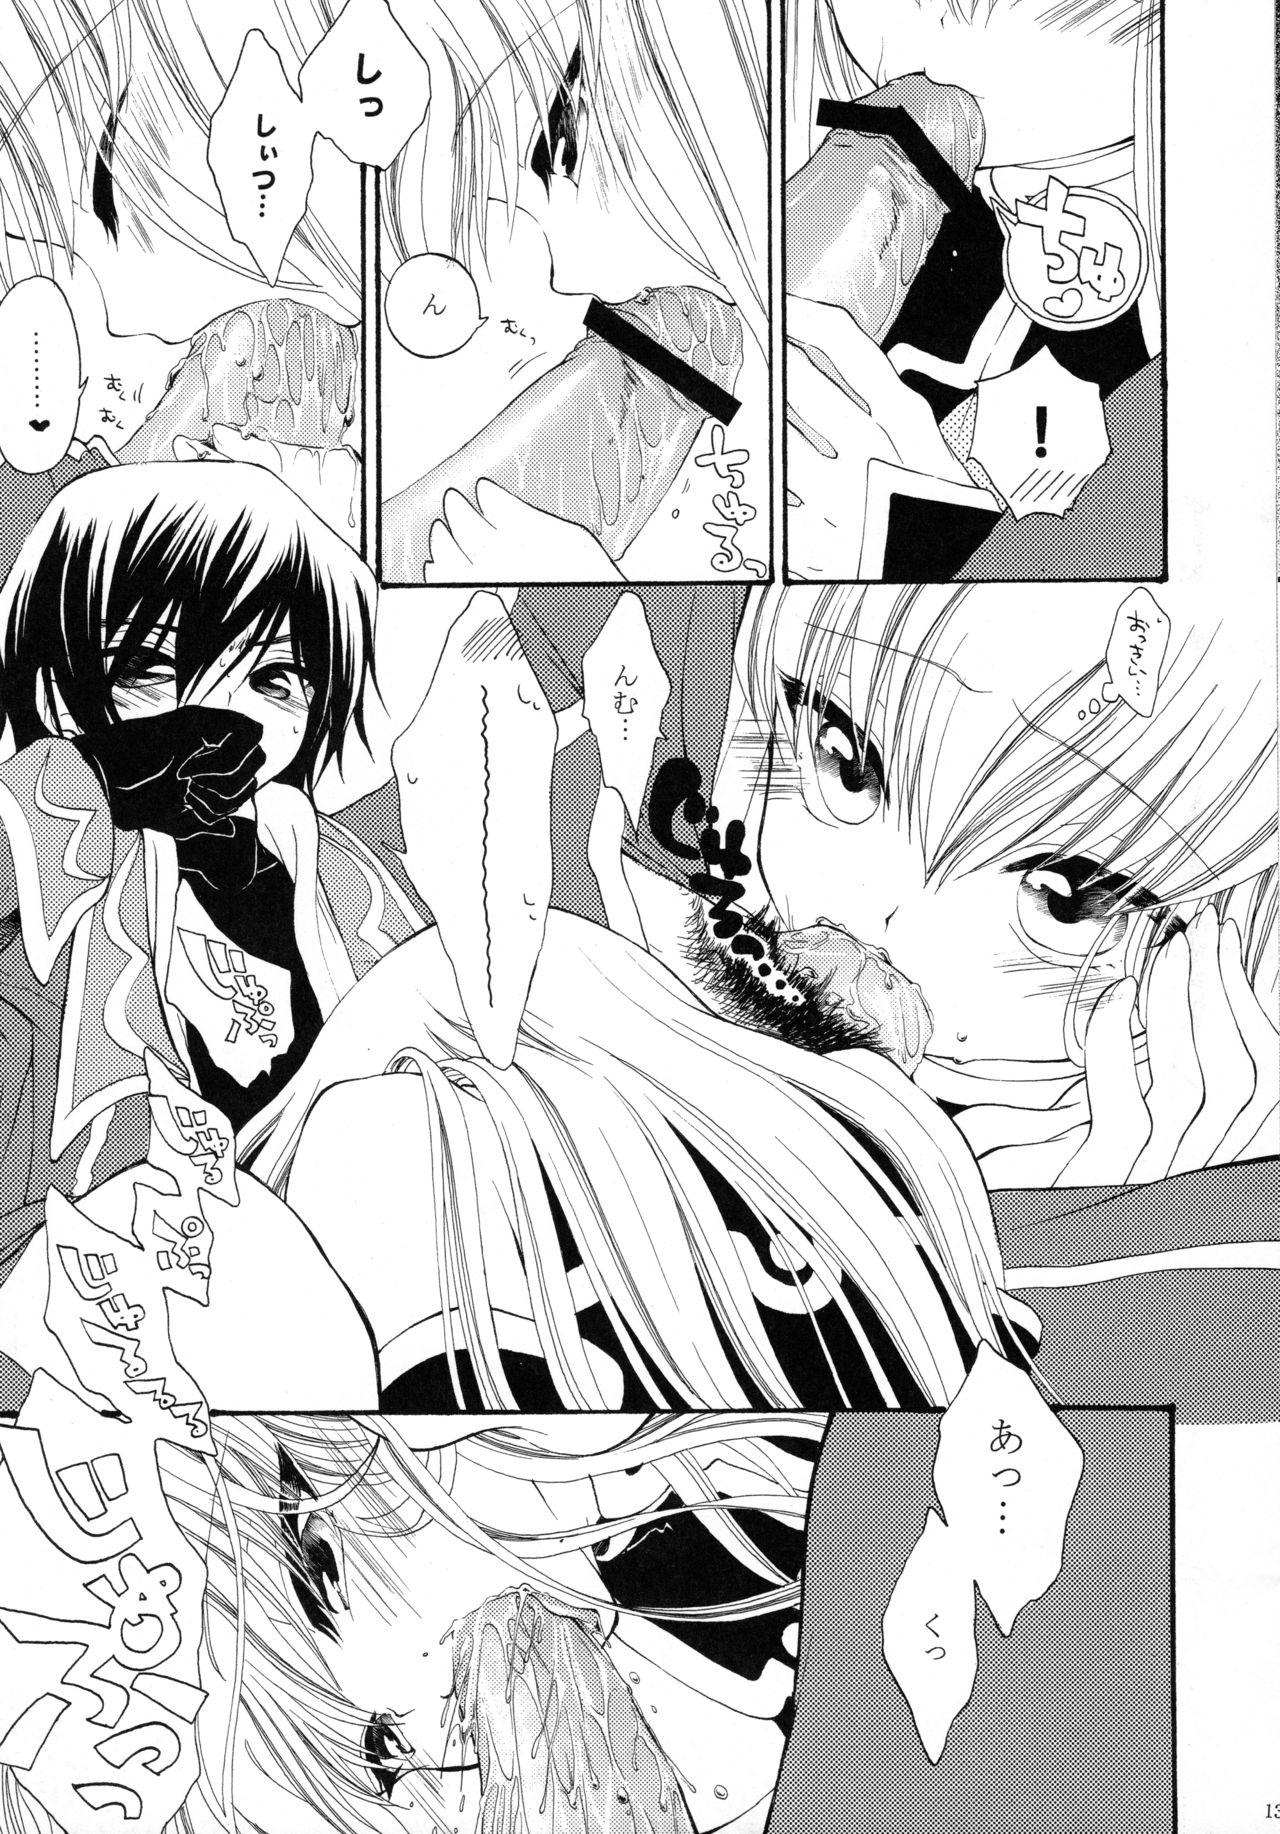 Dress I want you! - Code geass Anal Porn - Page 12